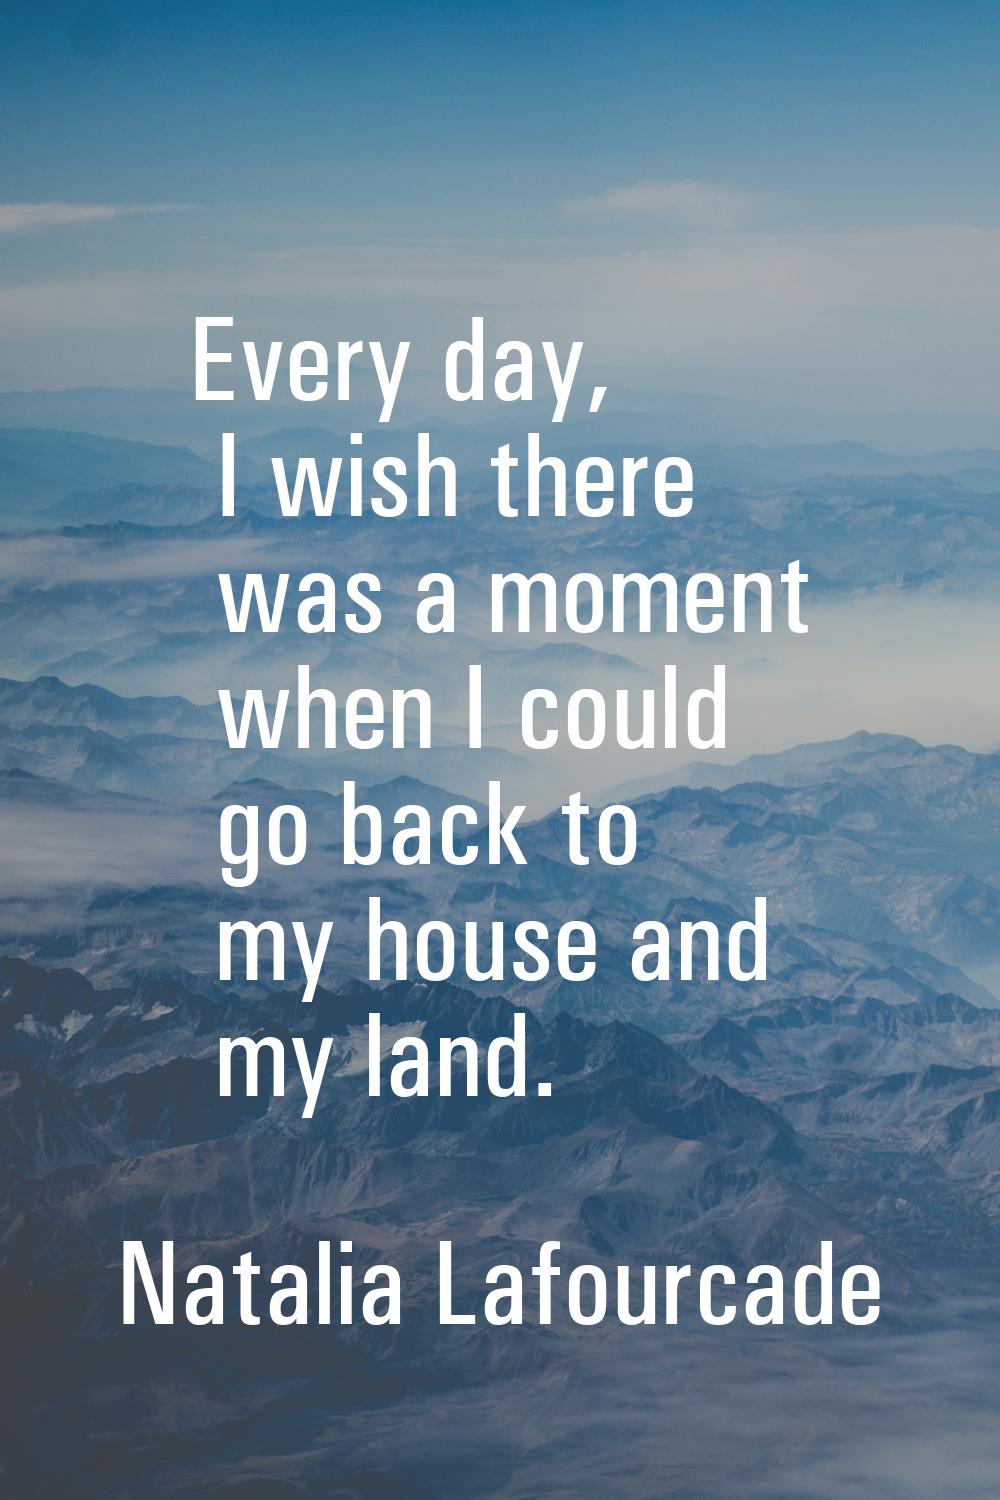 Every day, I wish there was a moment when I could go back to my house and my land.